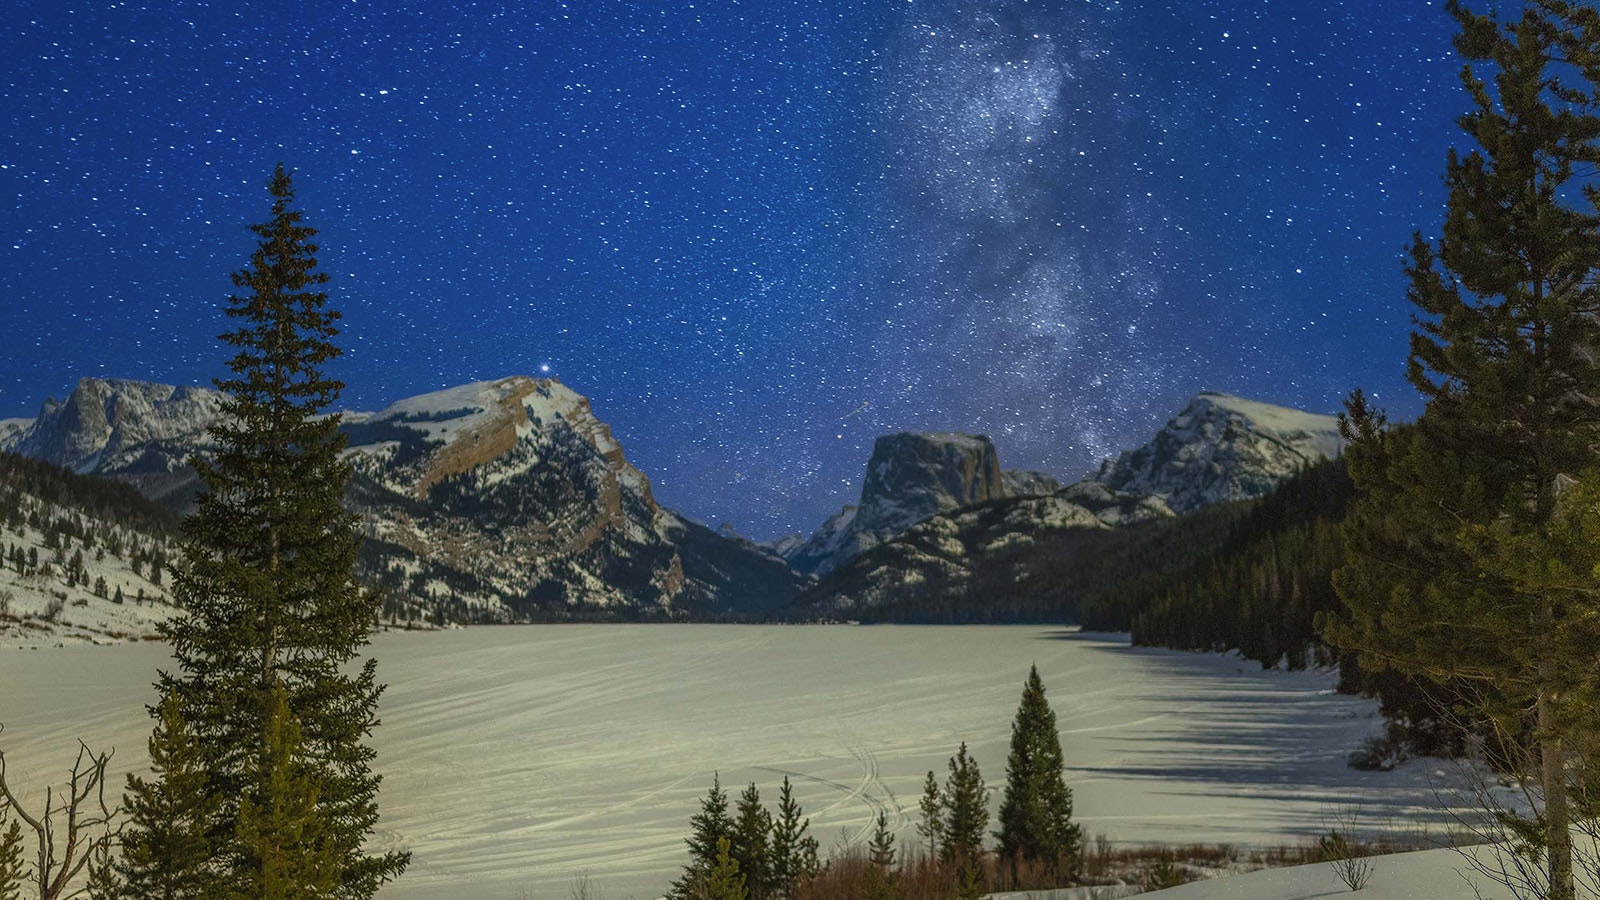 Noted Wyoming photographer Dave Bell of Pinedale says the beginning of spring is the prime time to view and photograph the Milky Way Galaxy.